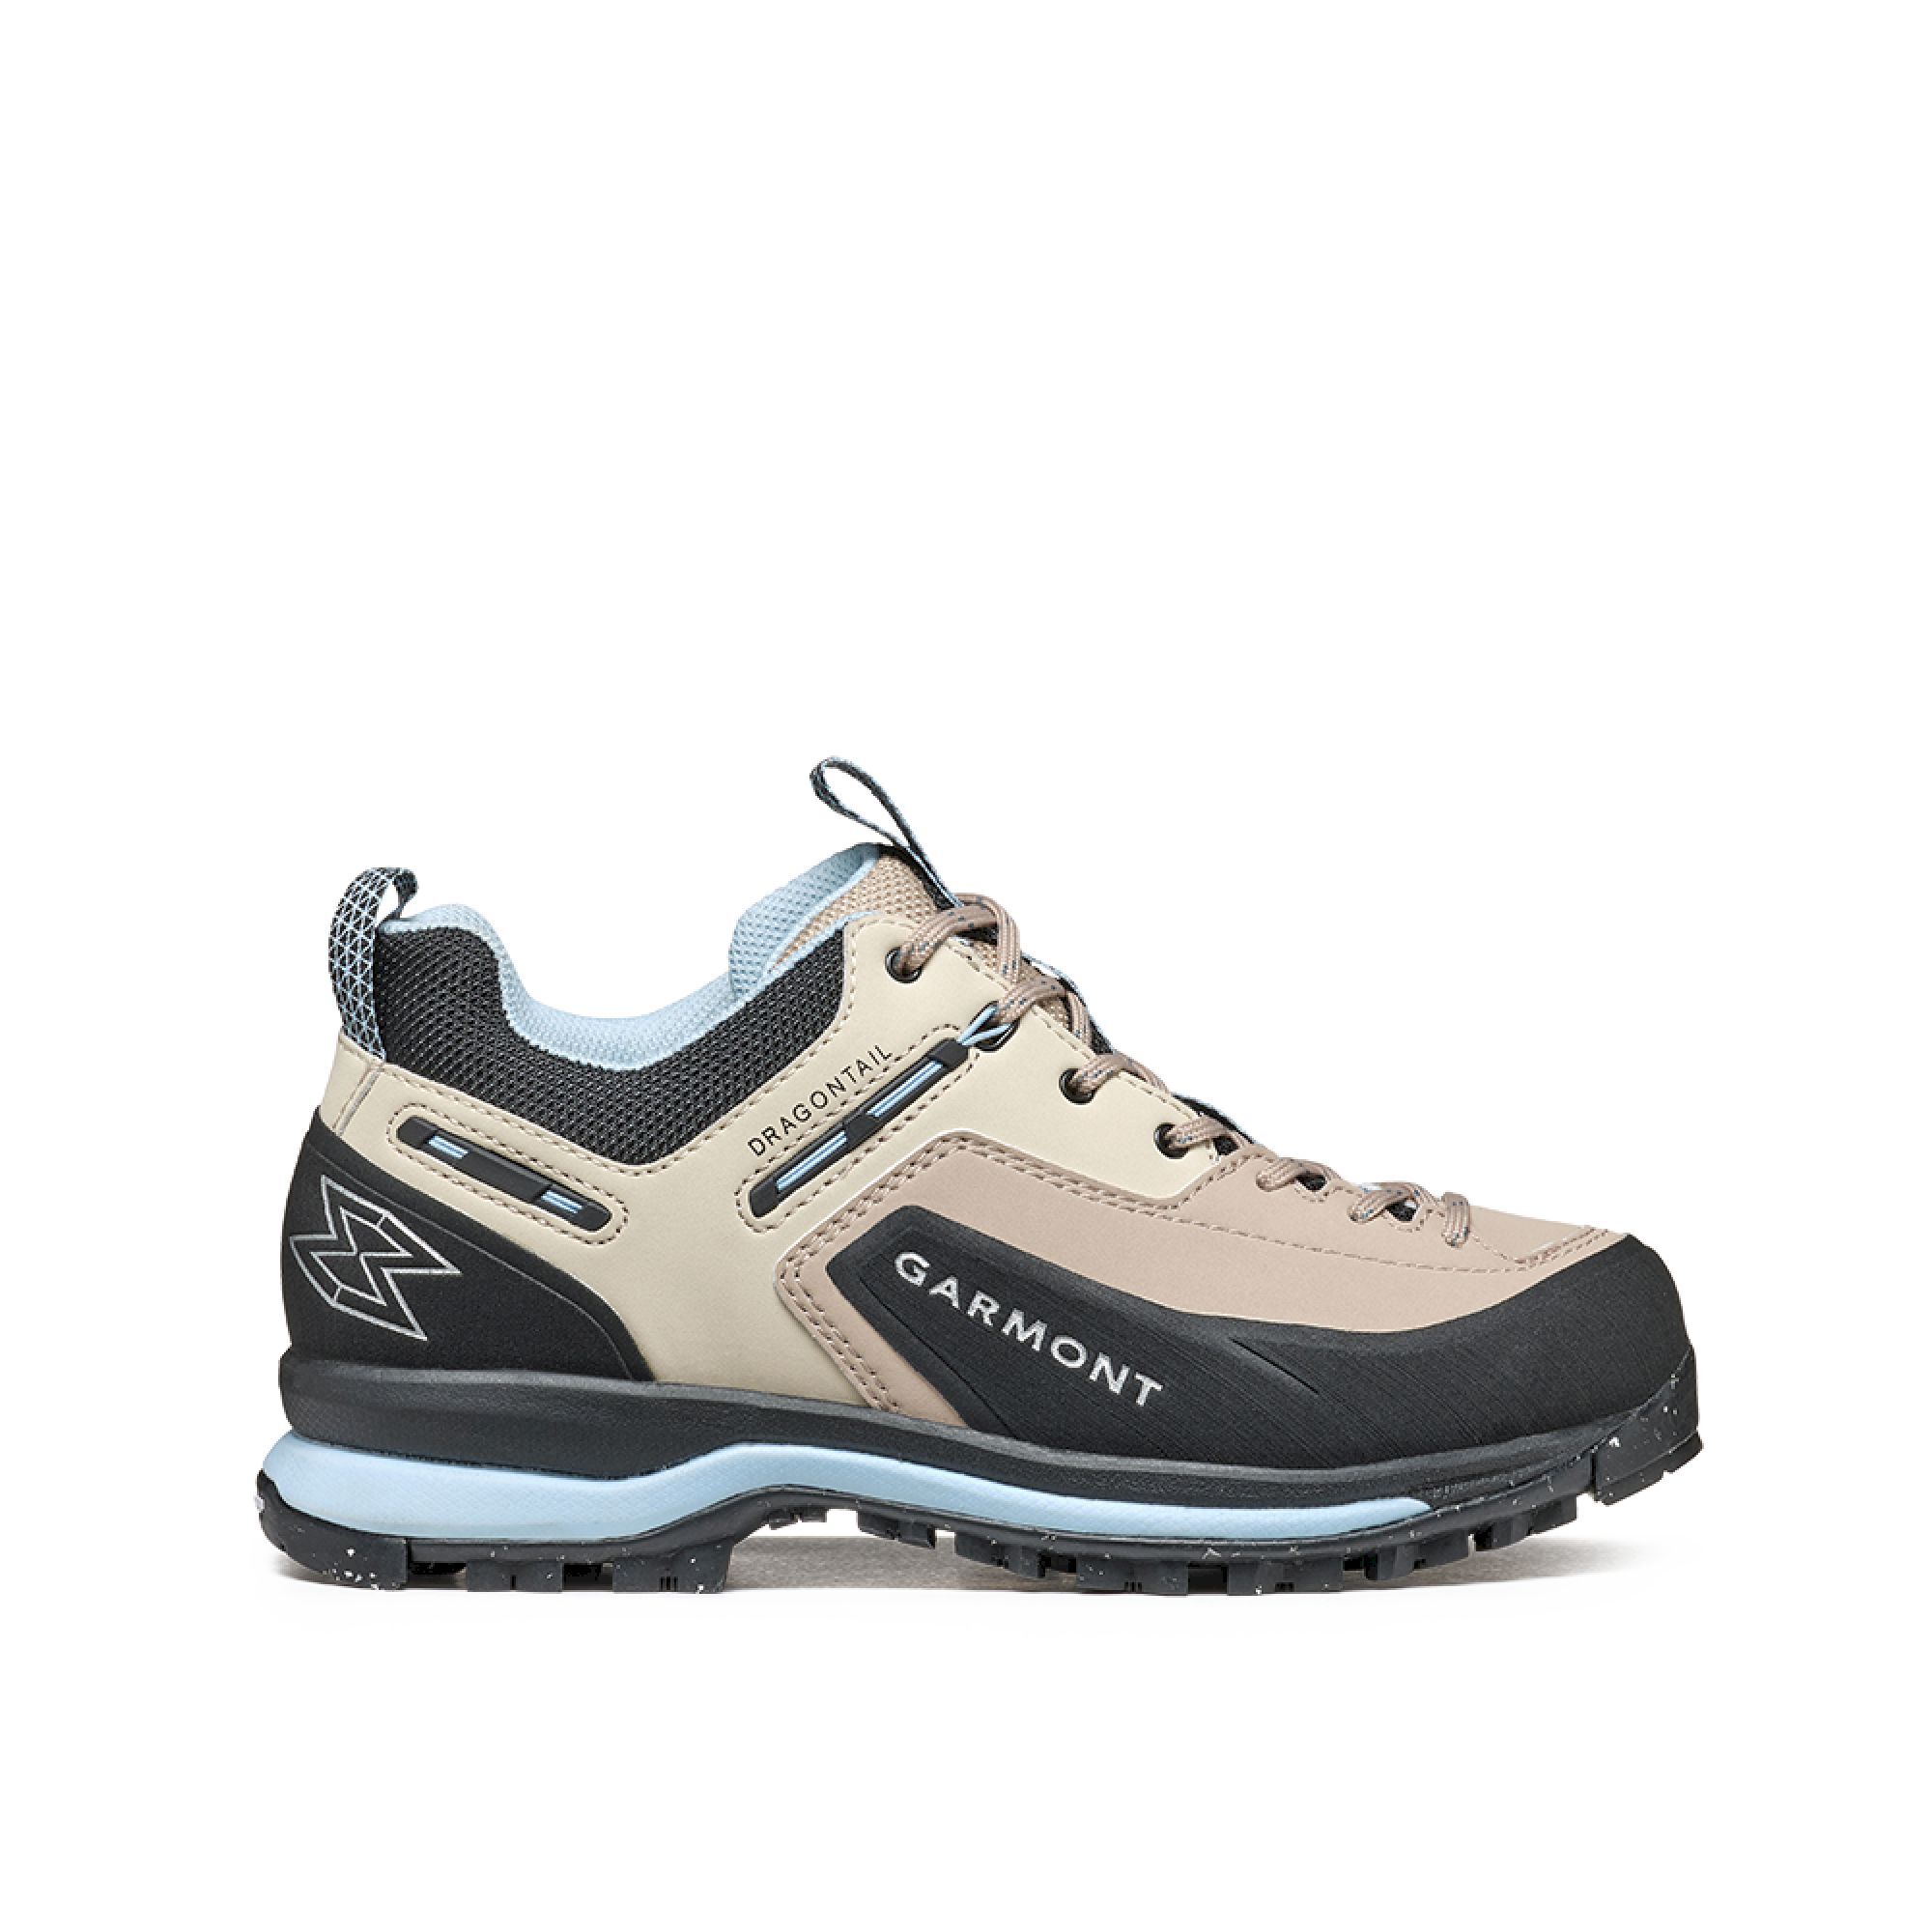 Garmont Dragontail Tech Geo - Approach shoes - Women's | Hardloop